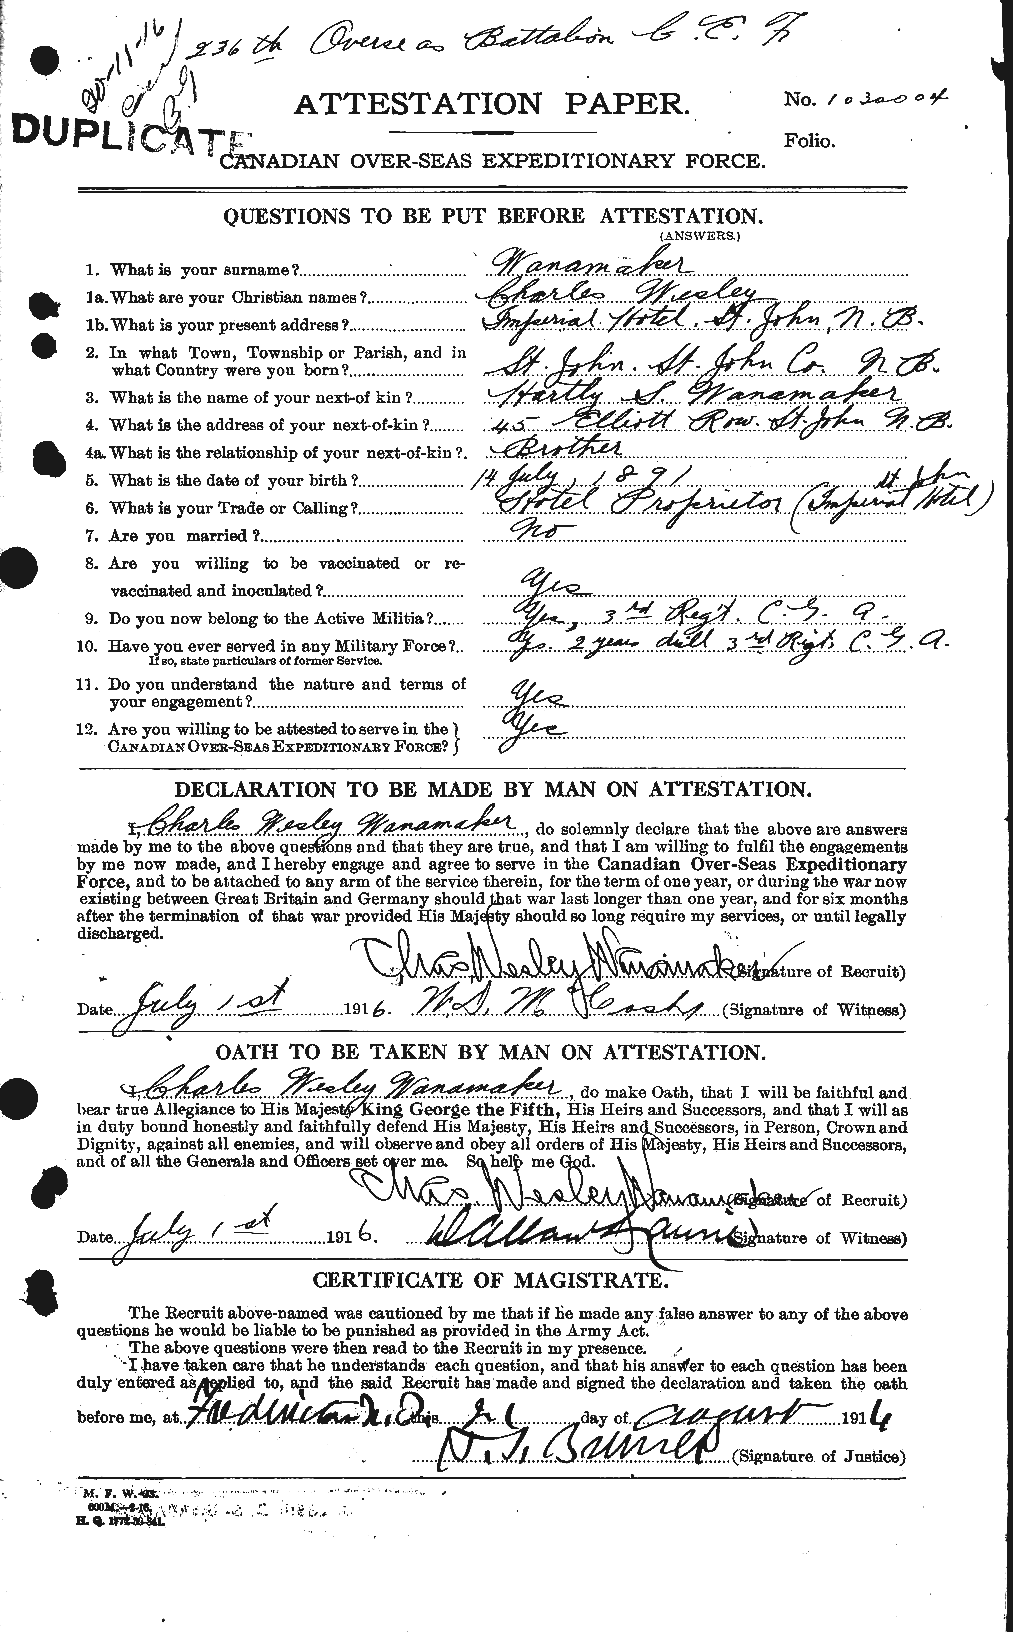 Personnel Records of the First World War - CEF 654903a